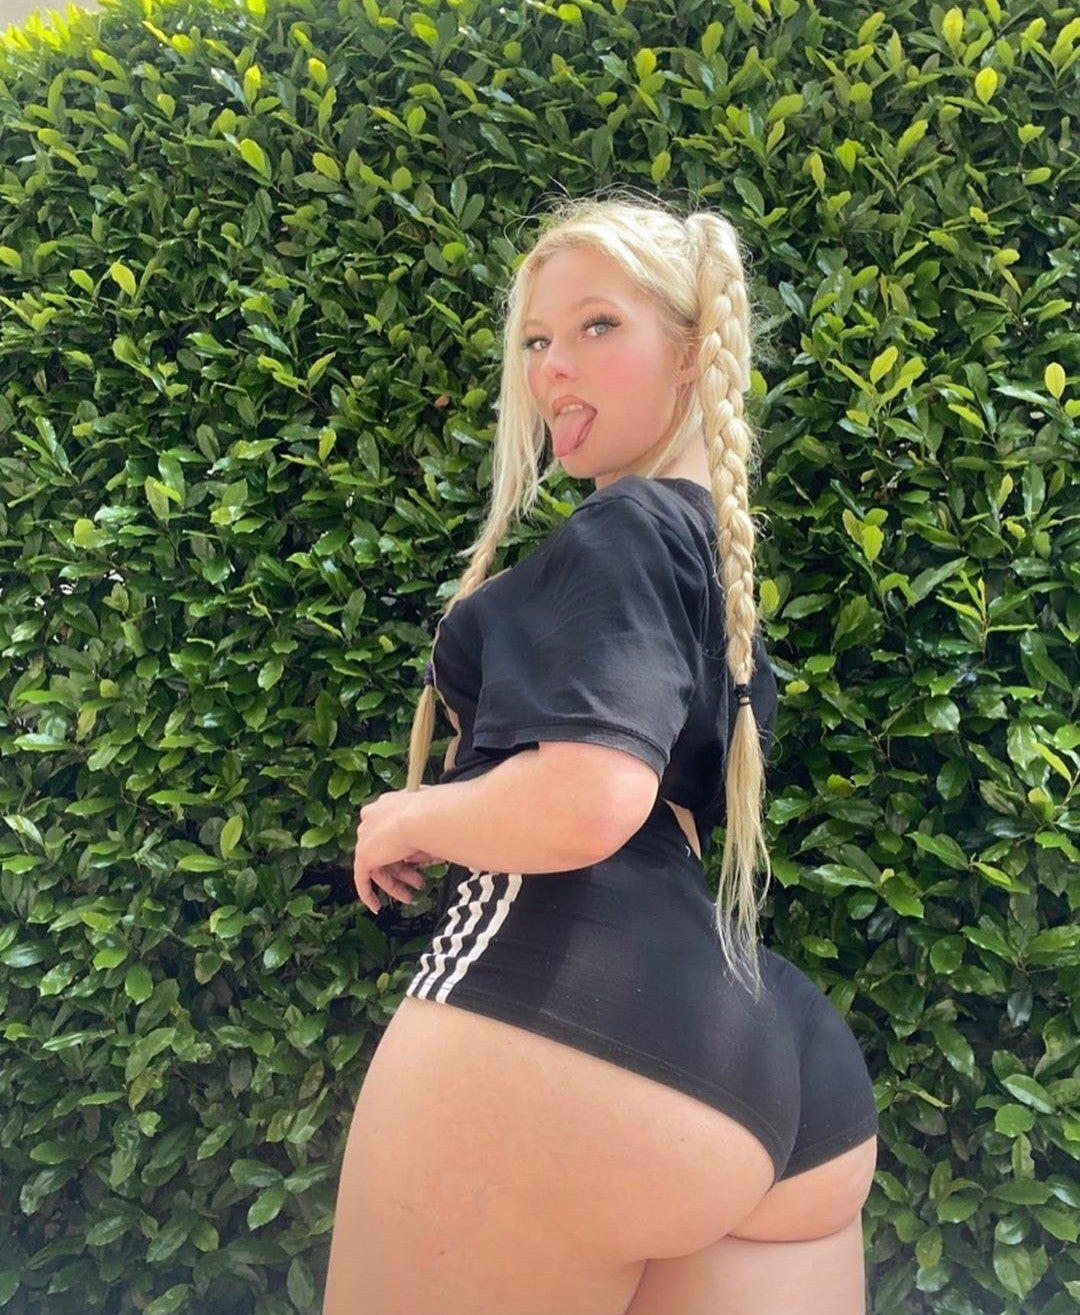 PAWG Wow - HAPPY BOOTY.